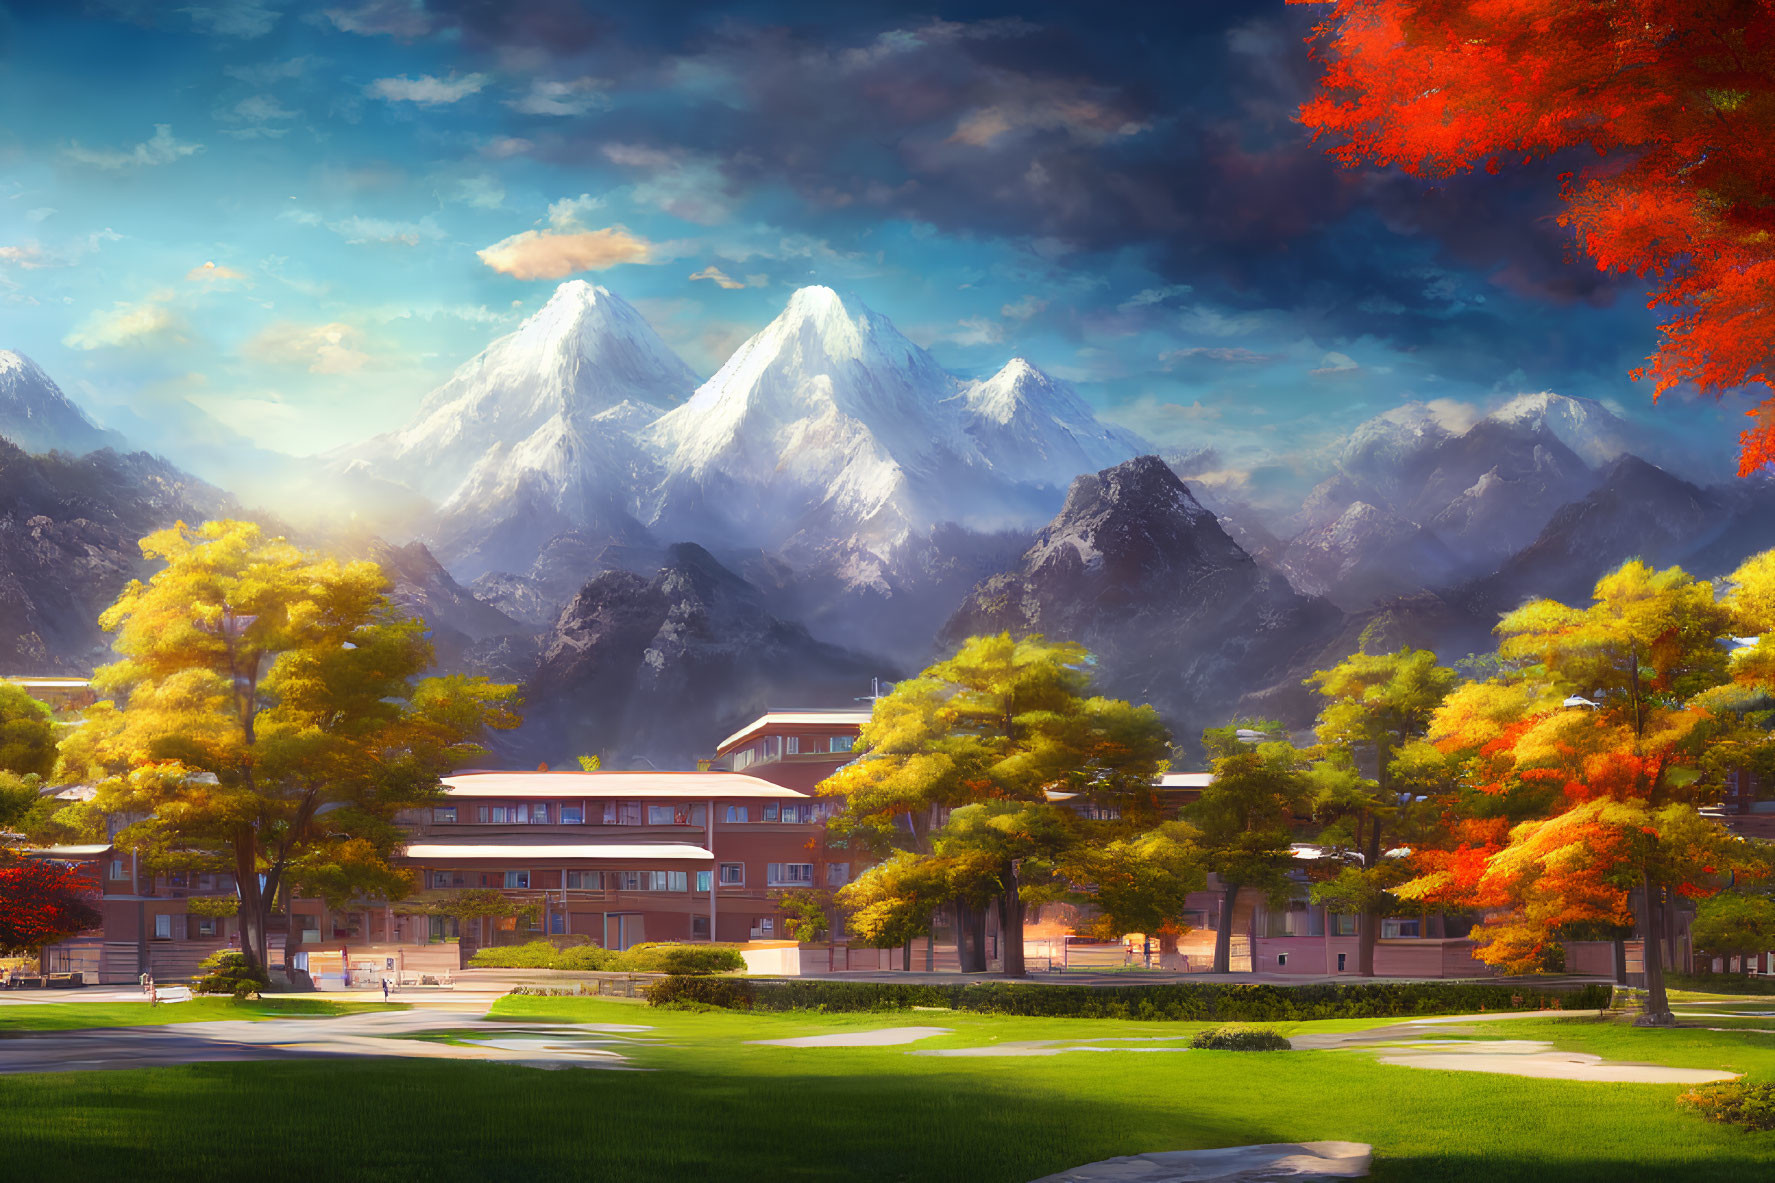 Scenic campus with autumn trees, students, and snow-capped mountains